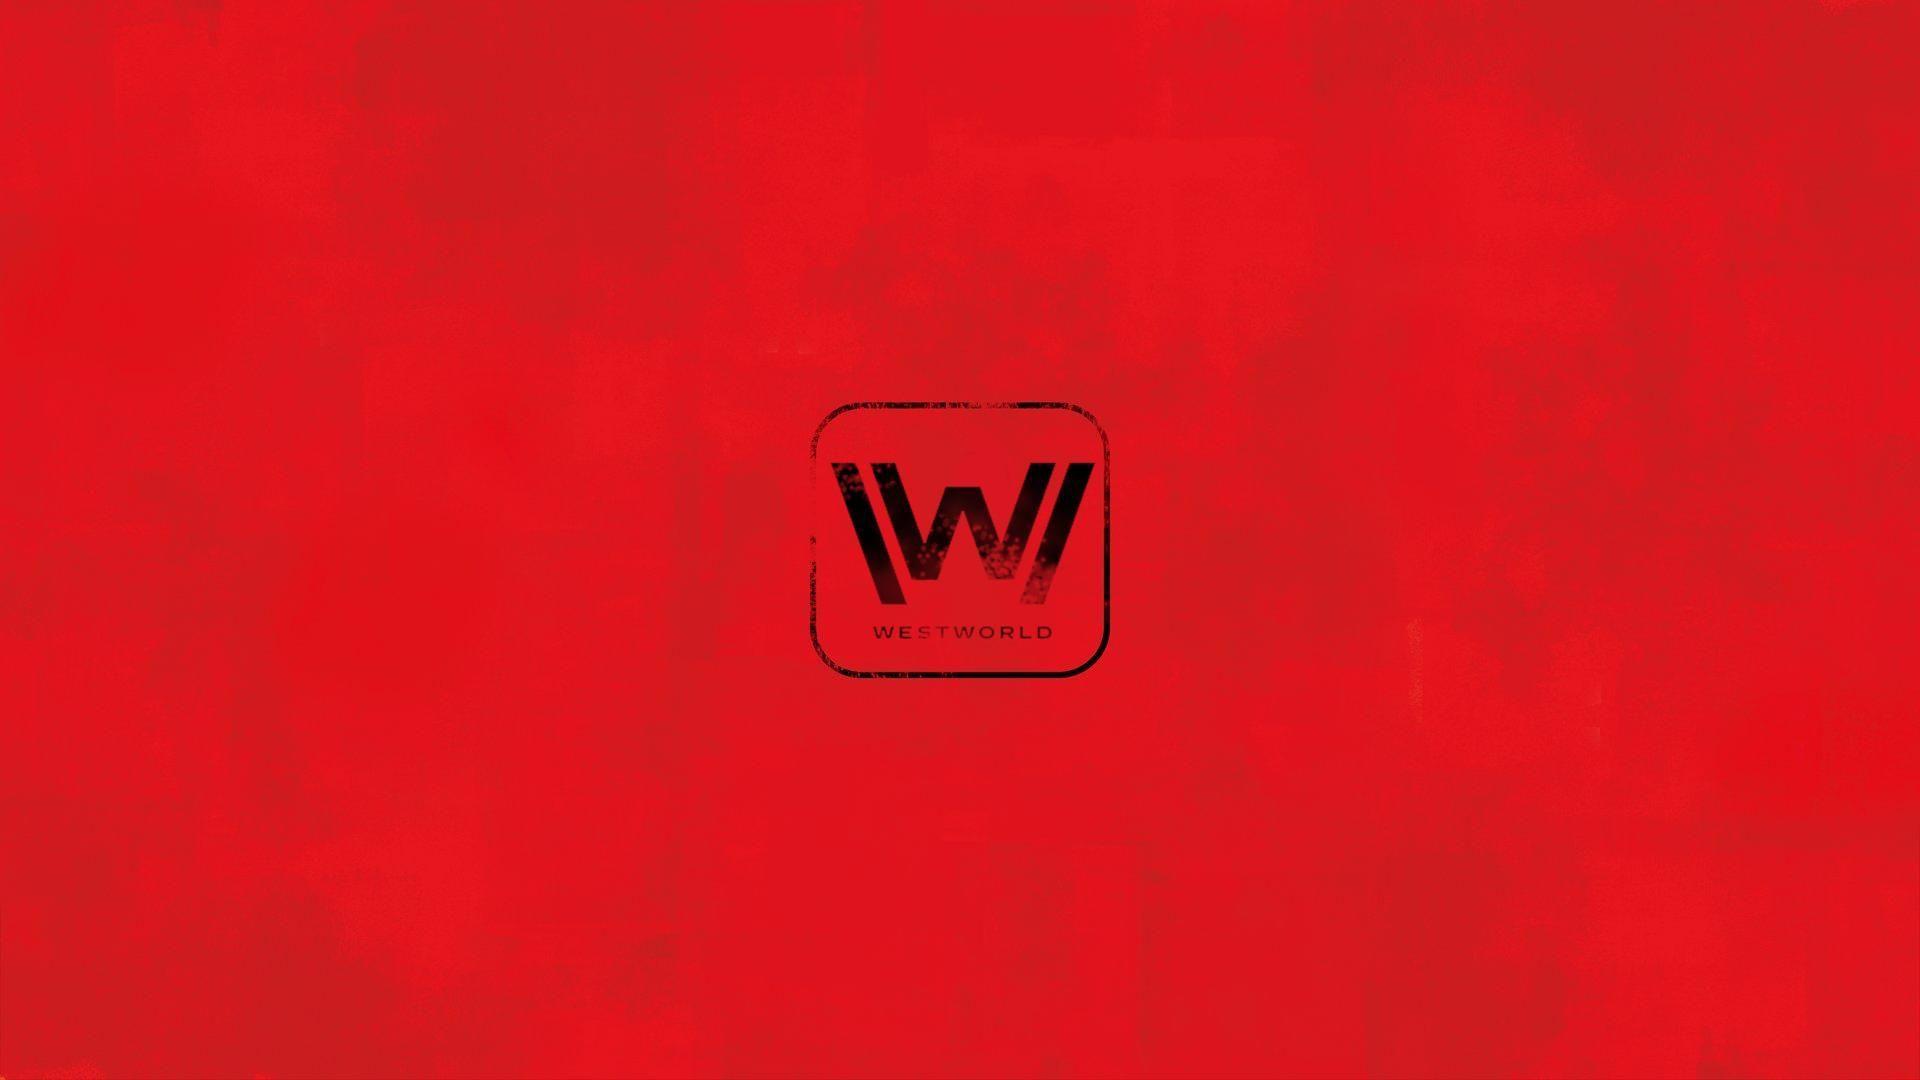 Westworld : wallpapers